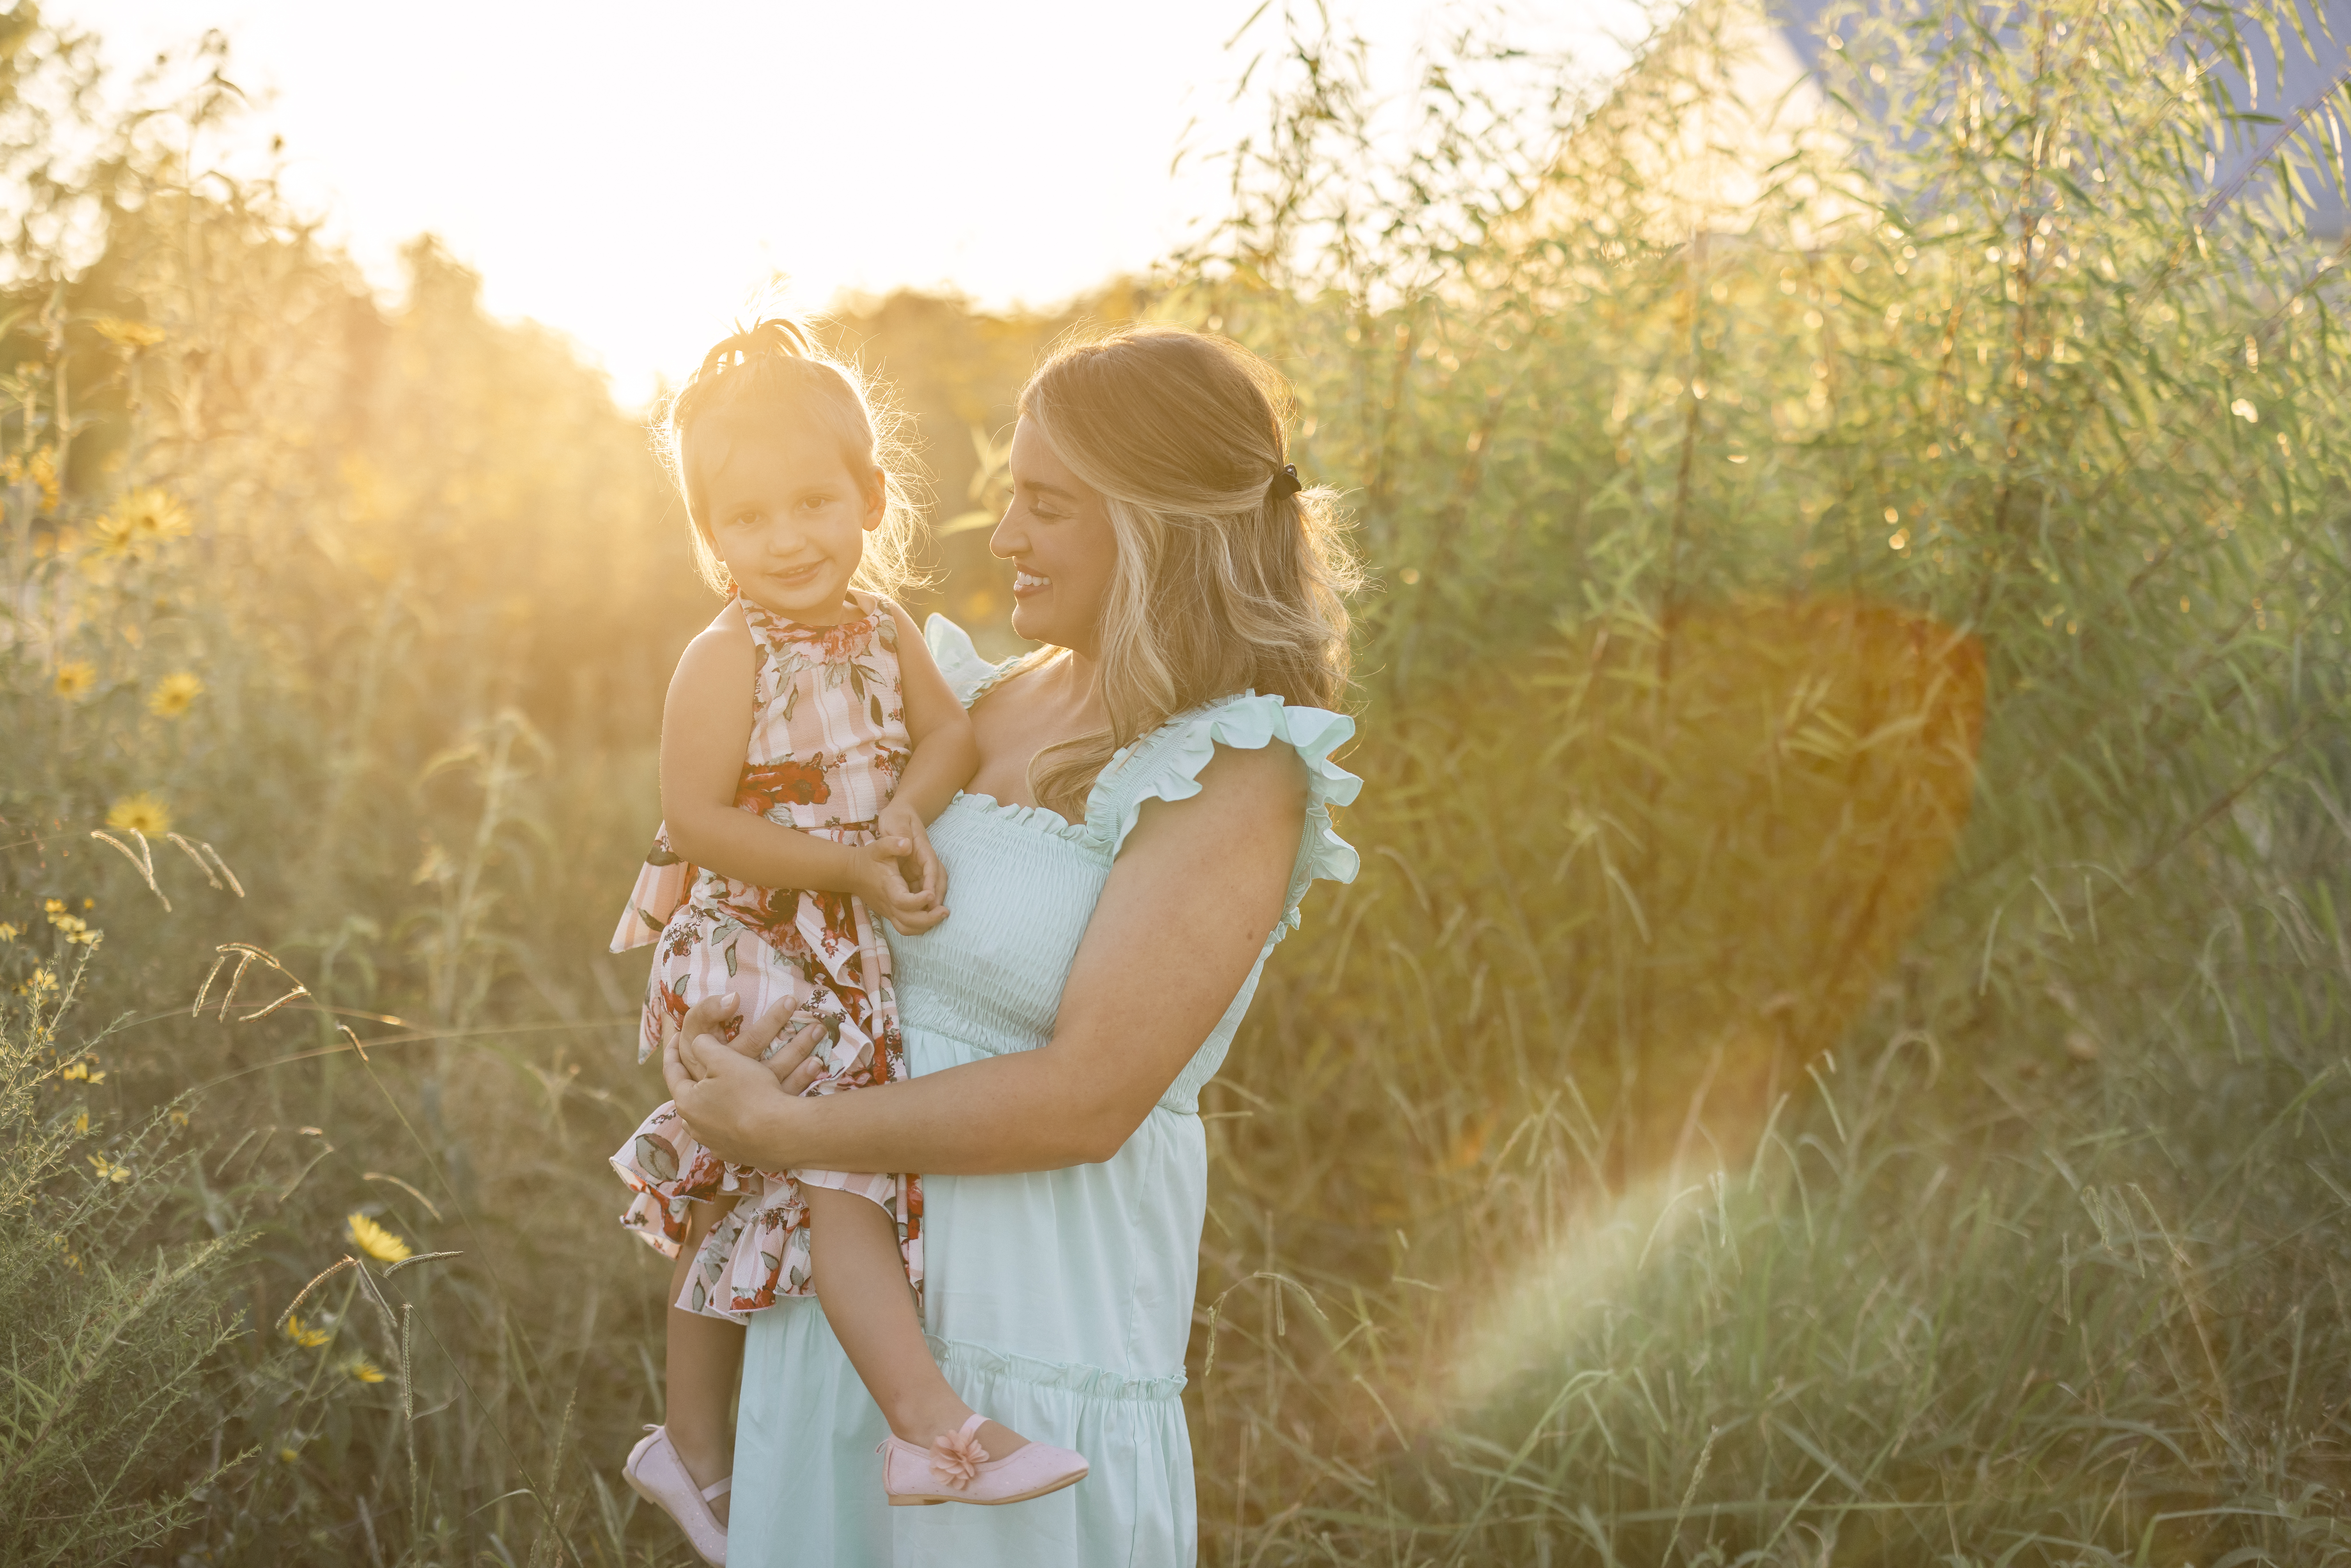 Mommy and Me Photo Shoot during golden hour in a field of yellow flowers